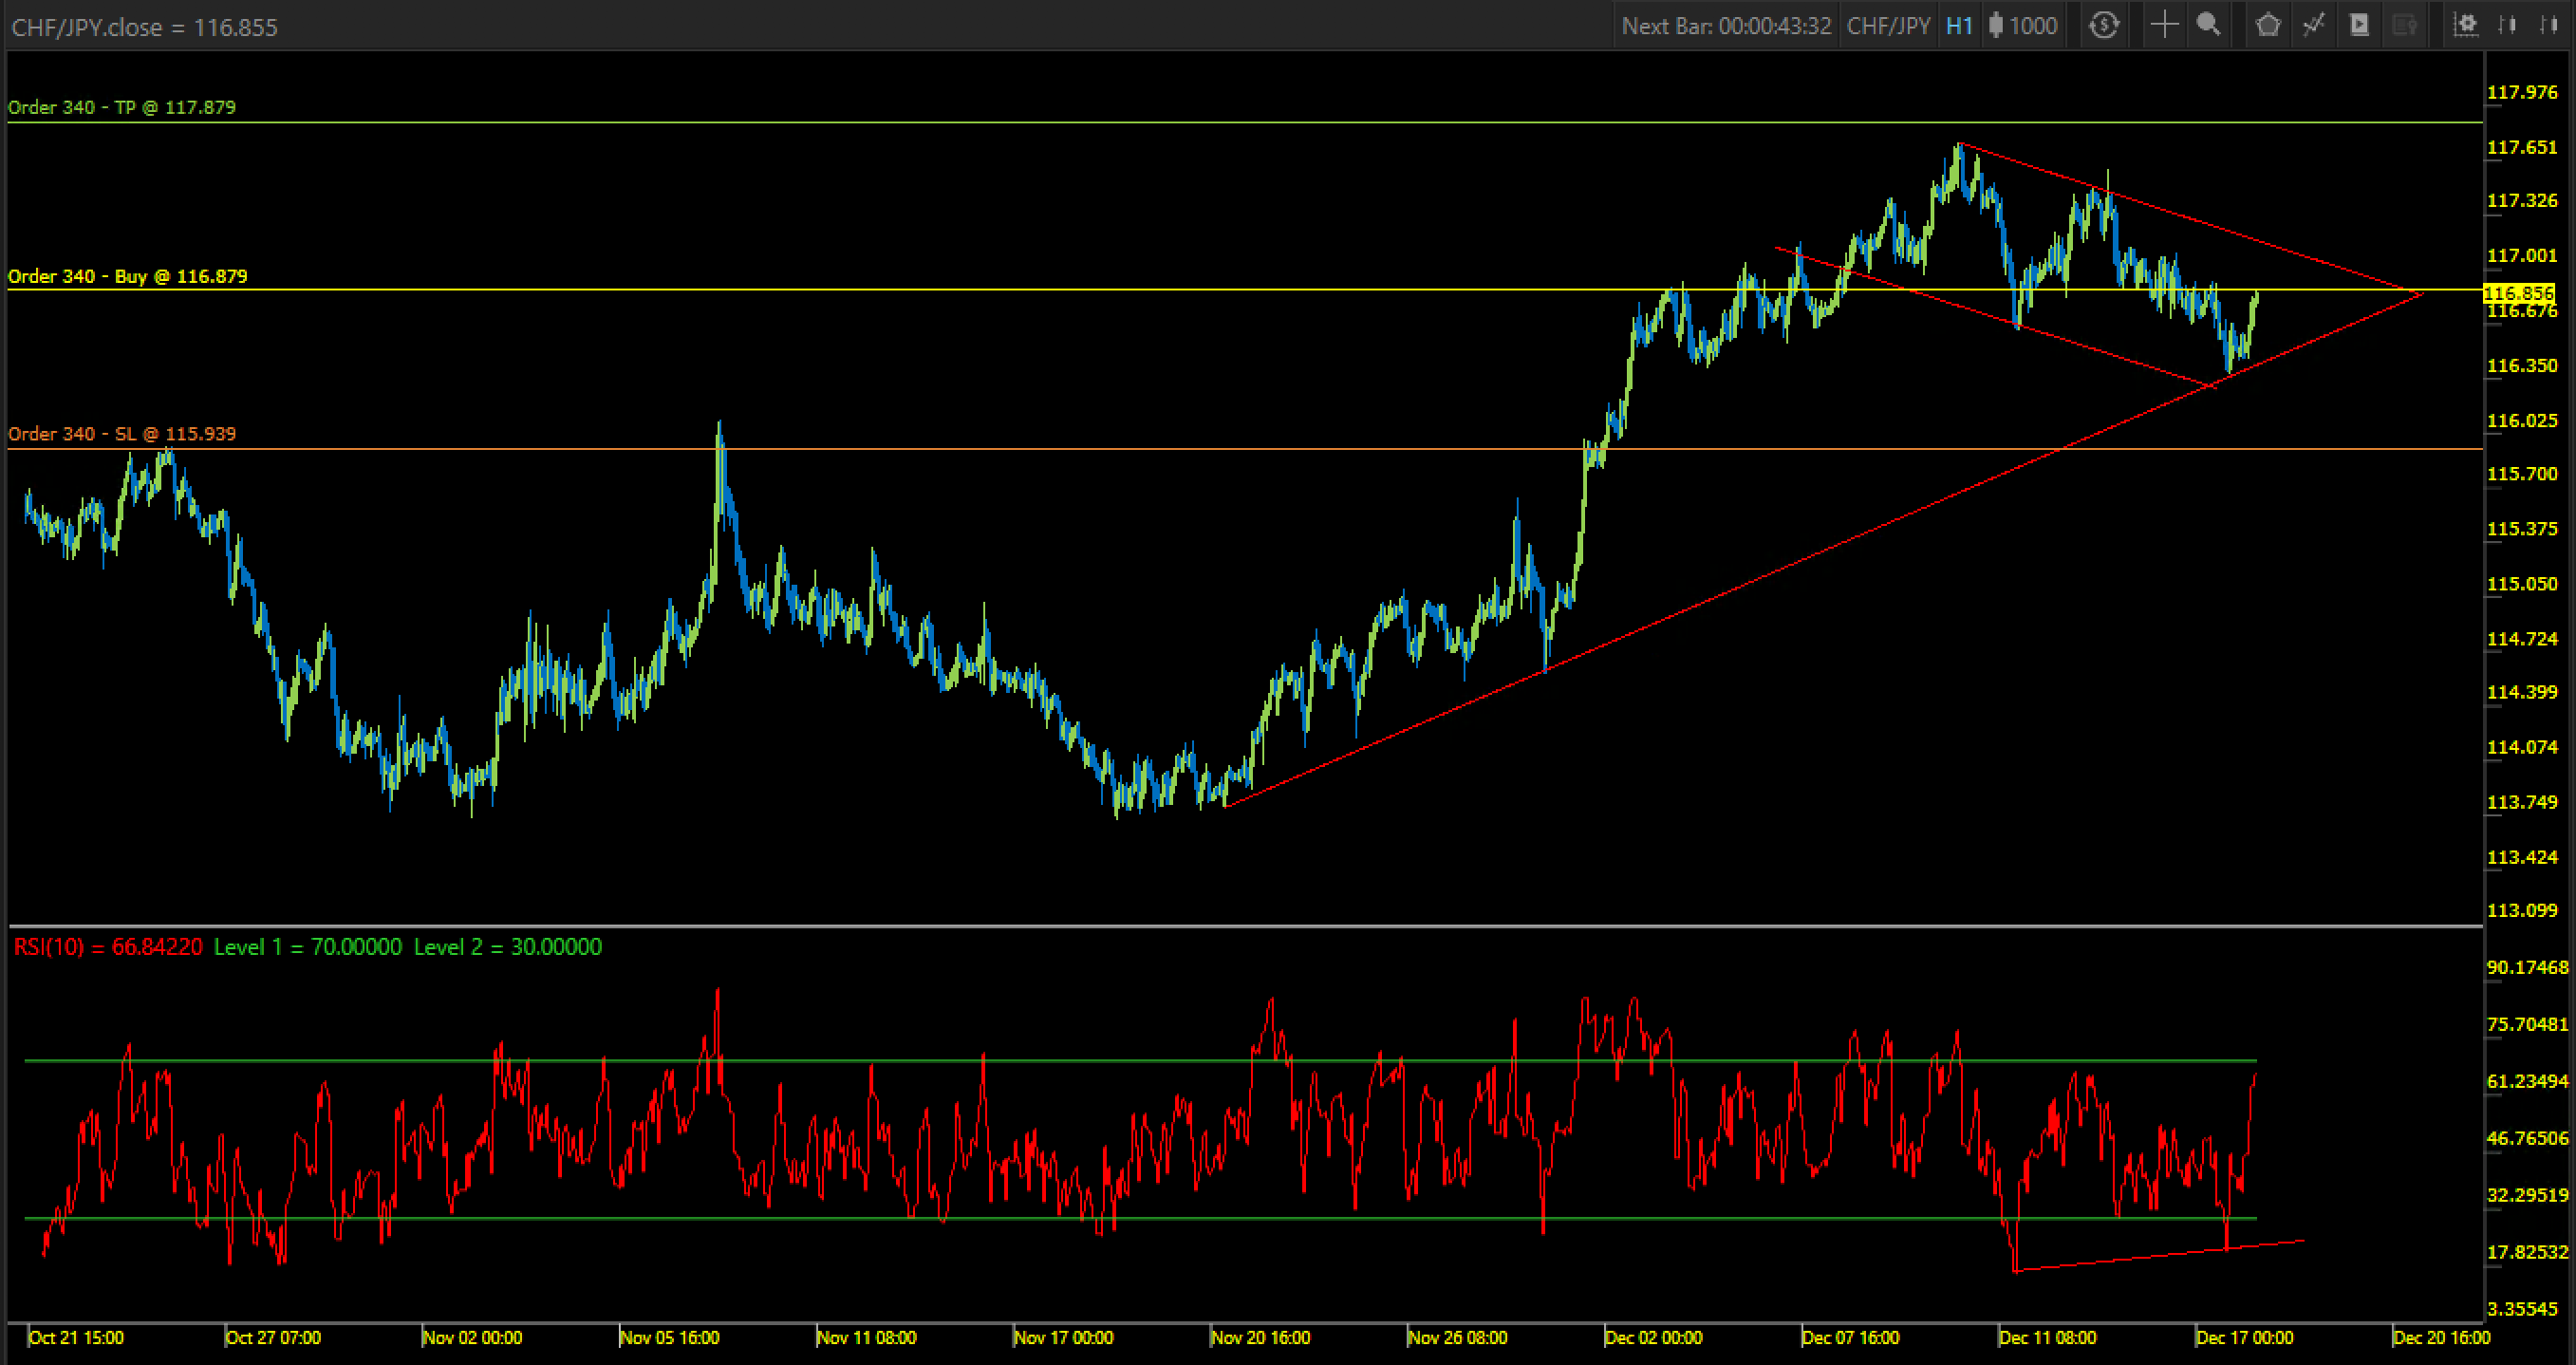 SELL USD/CHF